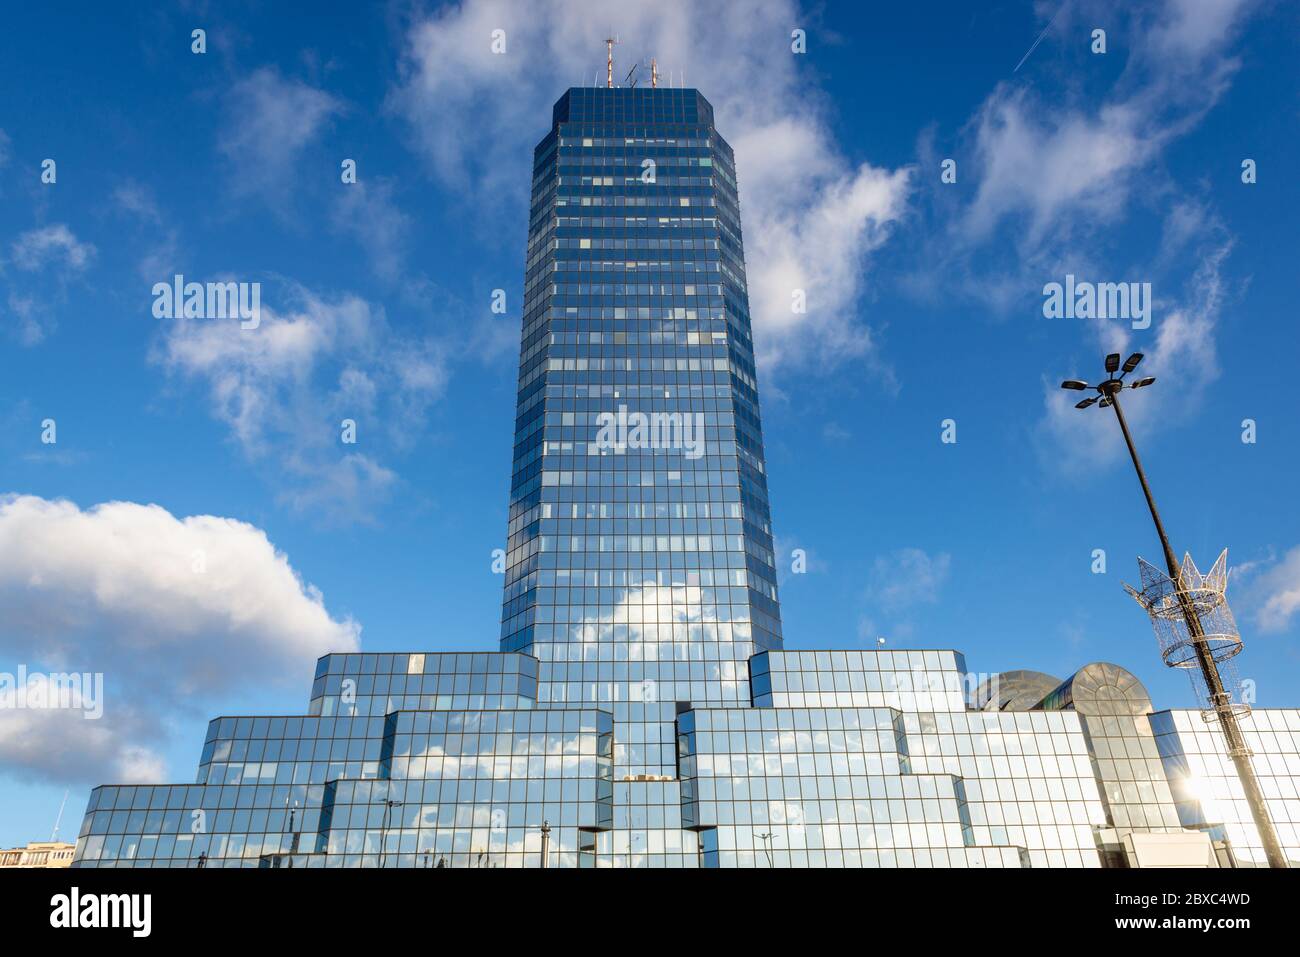 Blekitny Wiezowiec - Blue Skyscraper office building located in Bank Square in Warsaw, Poland Stock Photo